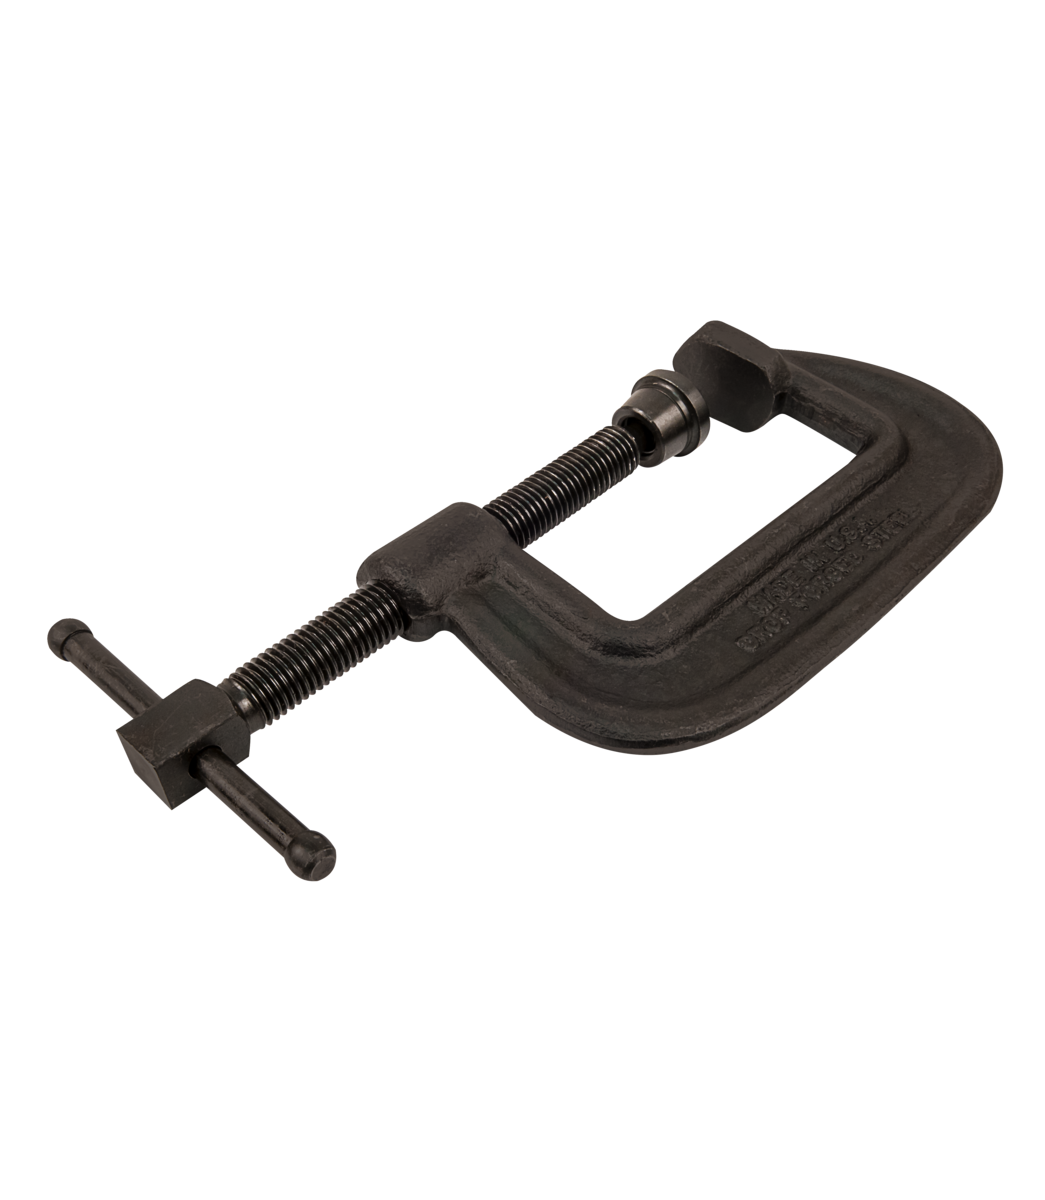 WILTON 100 Series Forged C-Clamp - Heavy-Duty 7/8 - 5-3/4” Opening Capacity